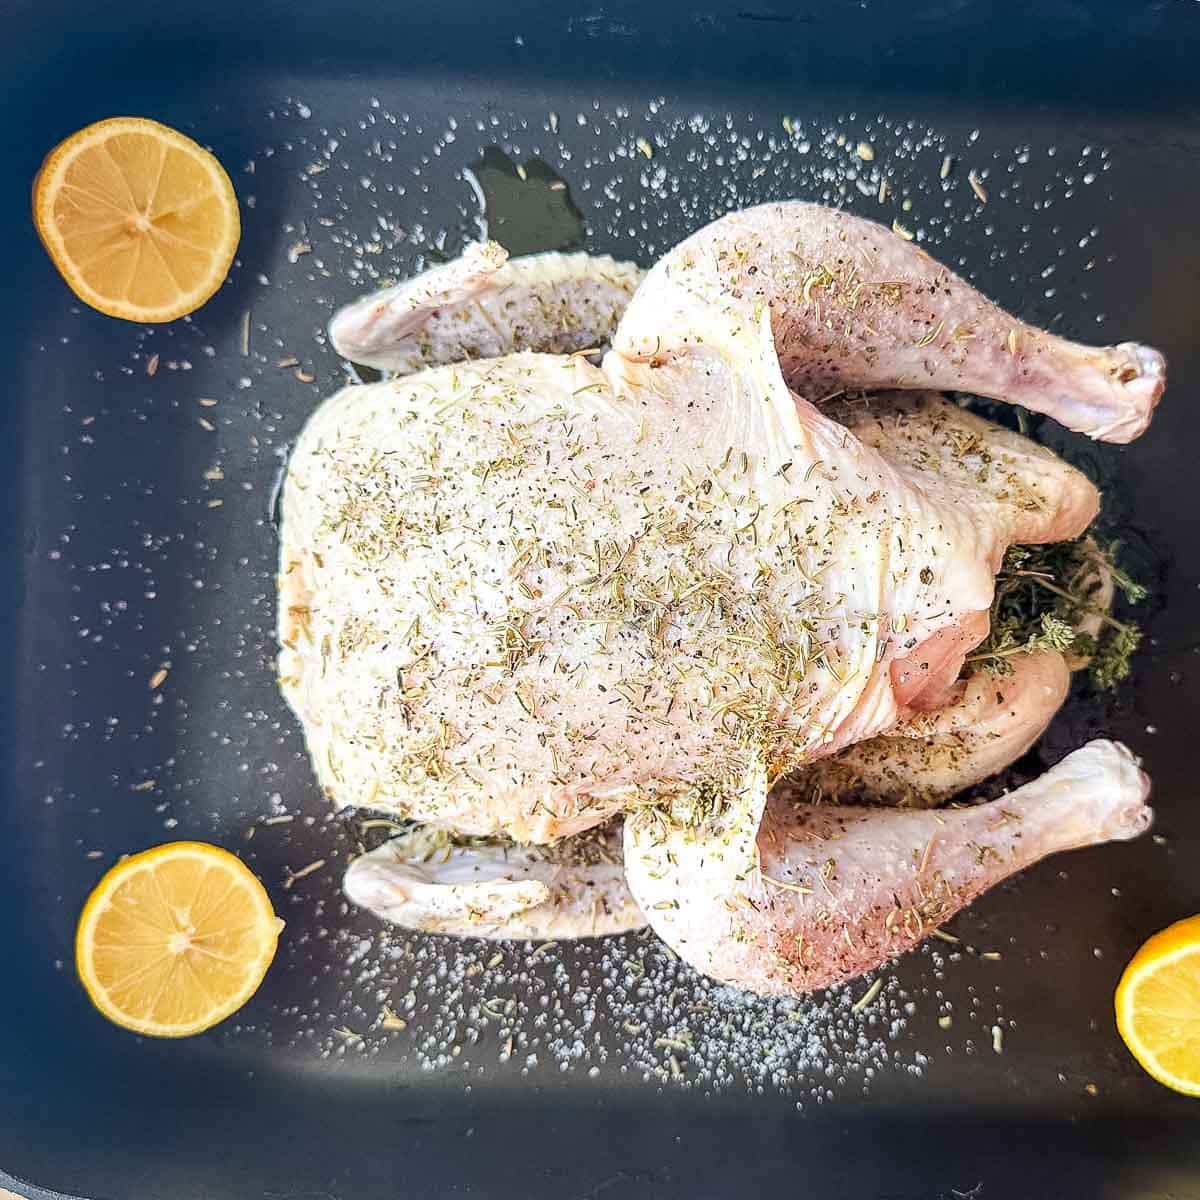 Chicken in roasting pan seasoned with salt and pepper and herbes de provence and surrounded by cut lemons.